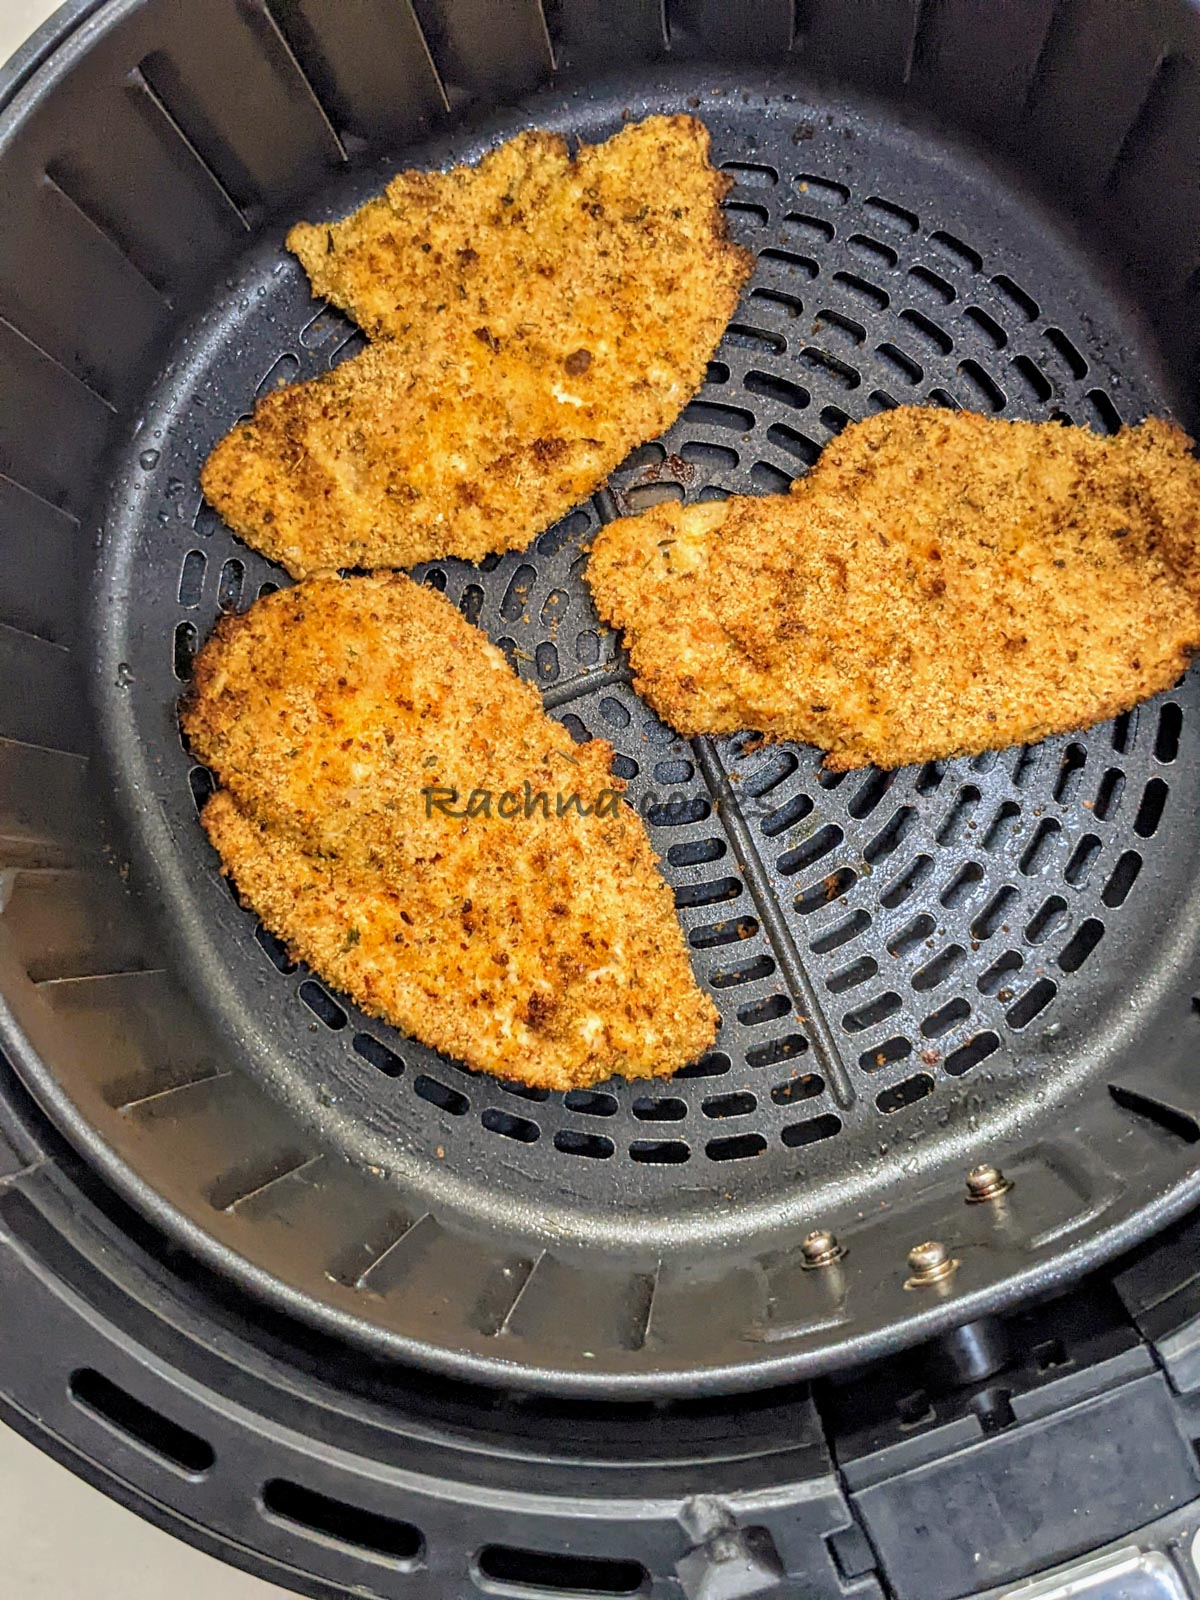 3 Chicken cutlets after air frying in air fryer basket.